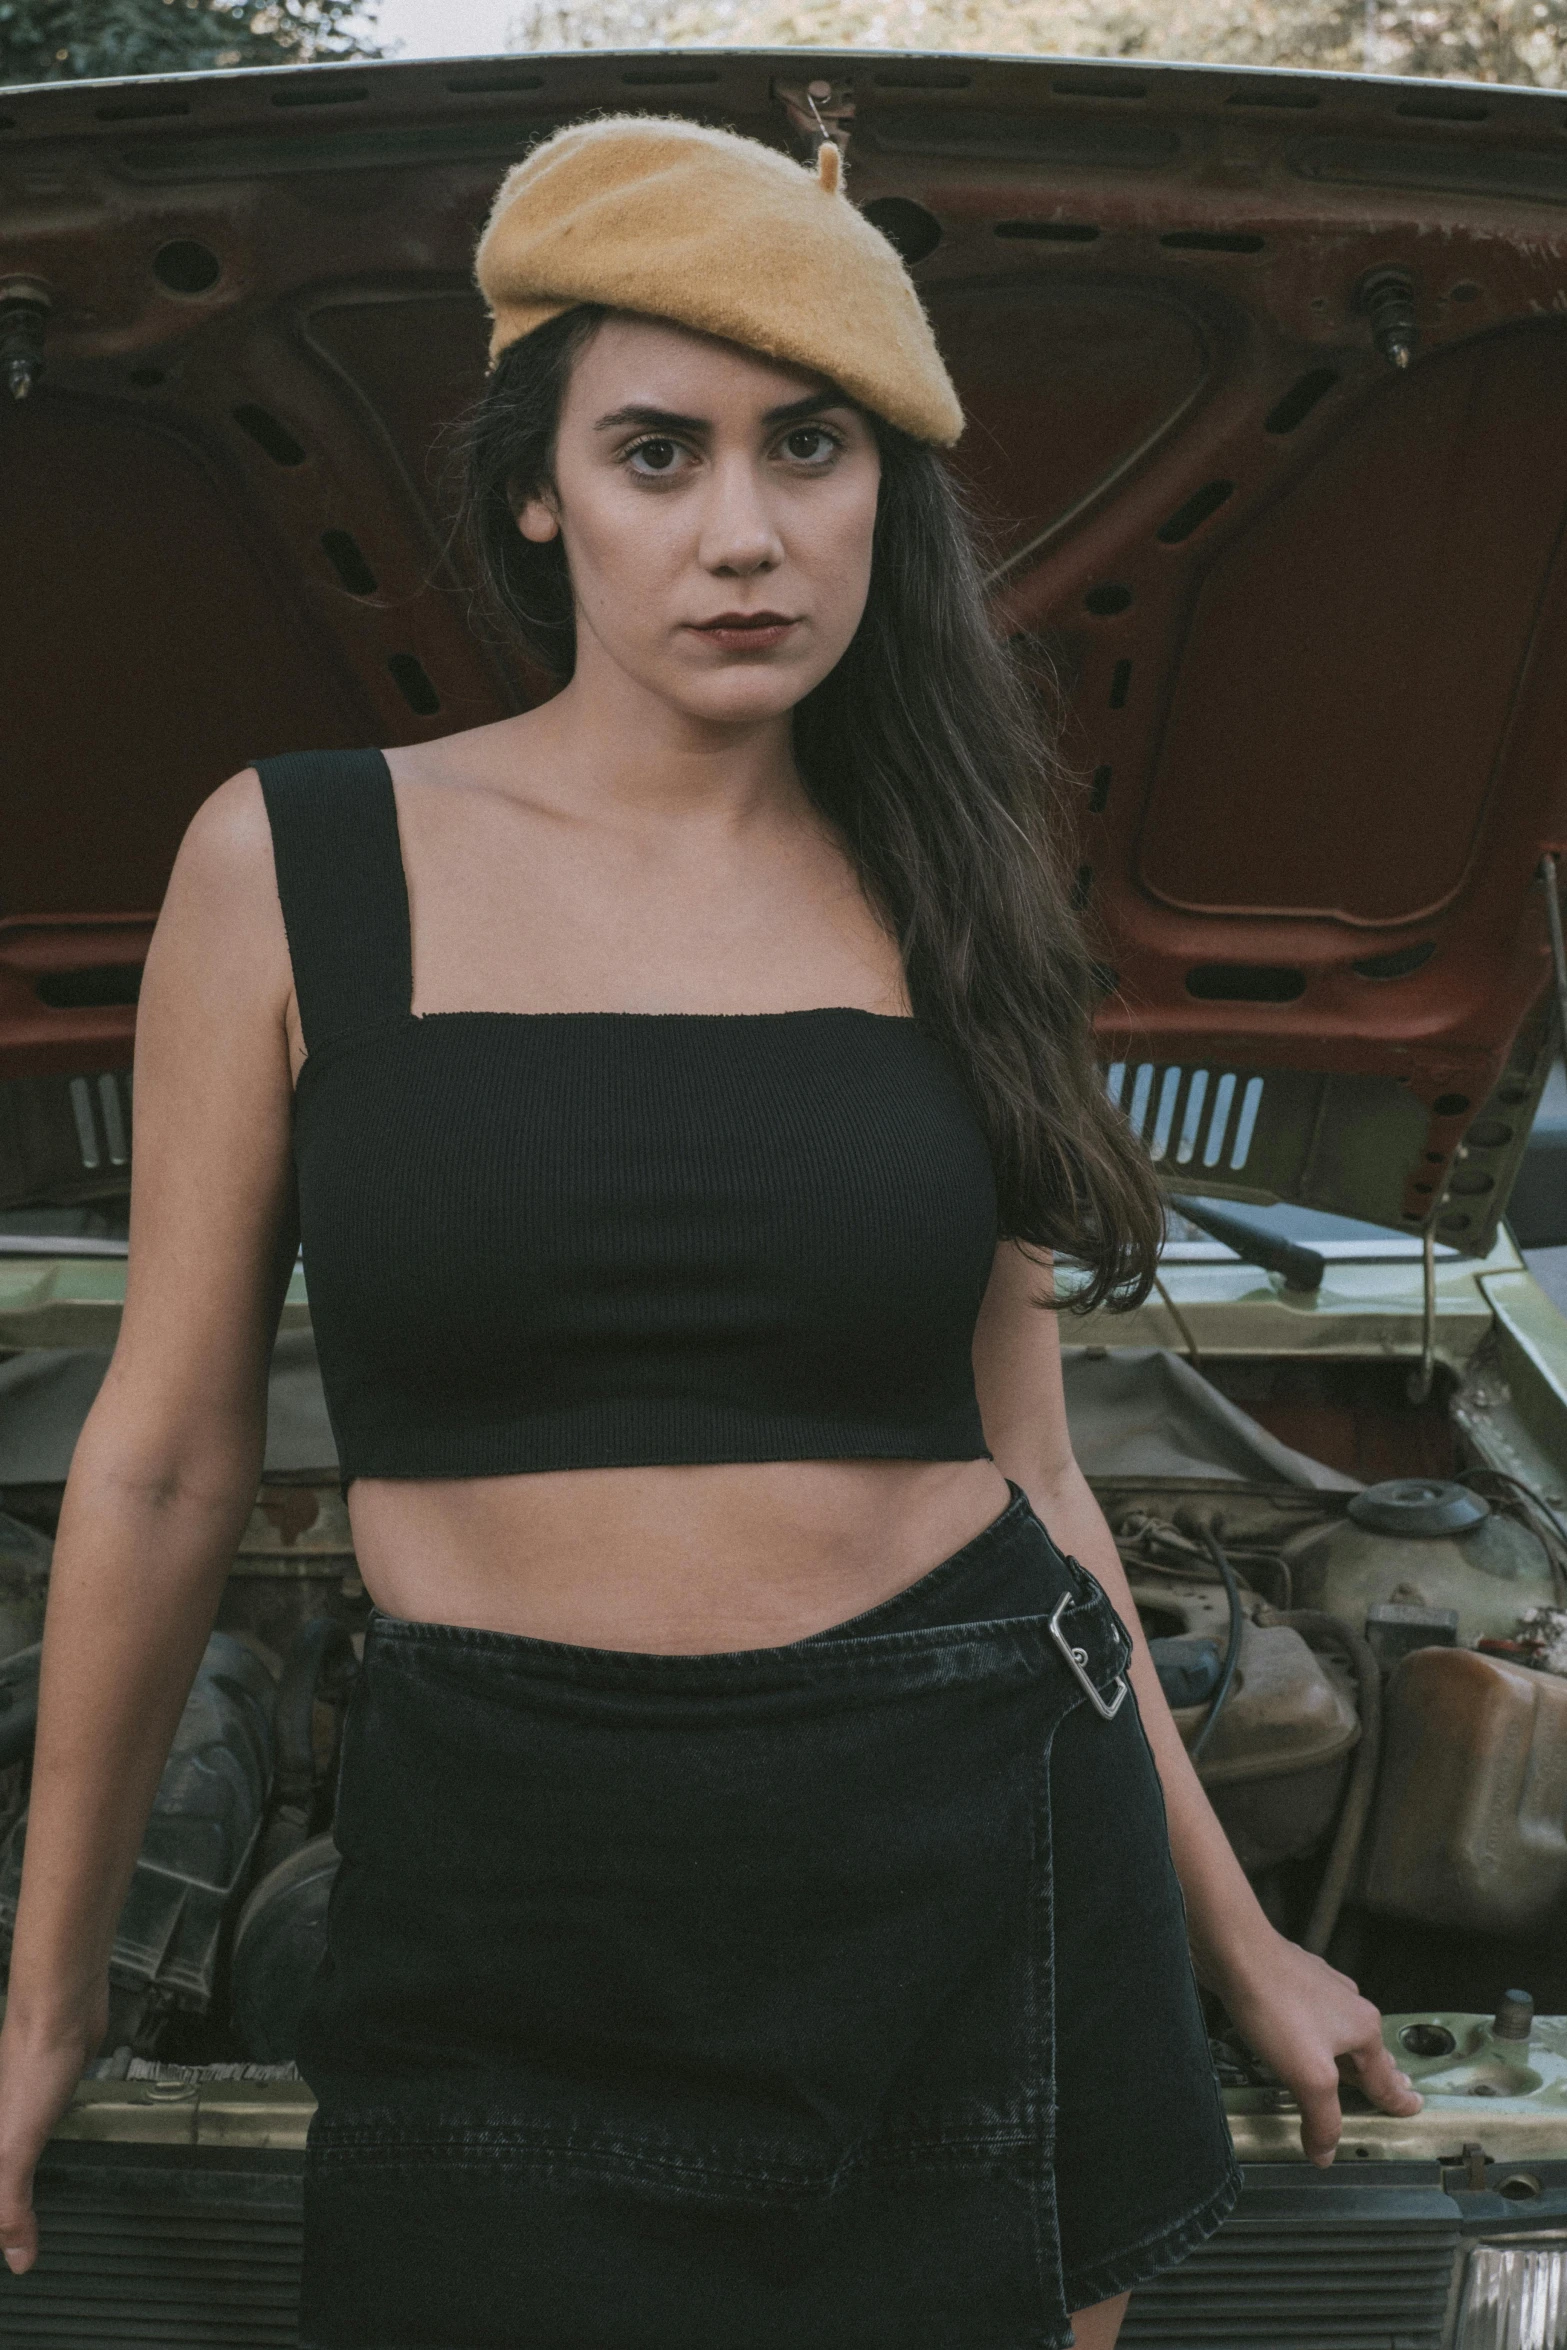 a young woman in a black skirt and crop top standing next to a car